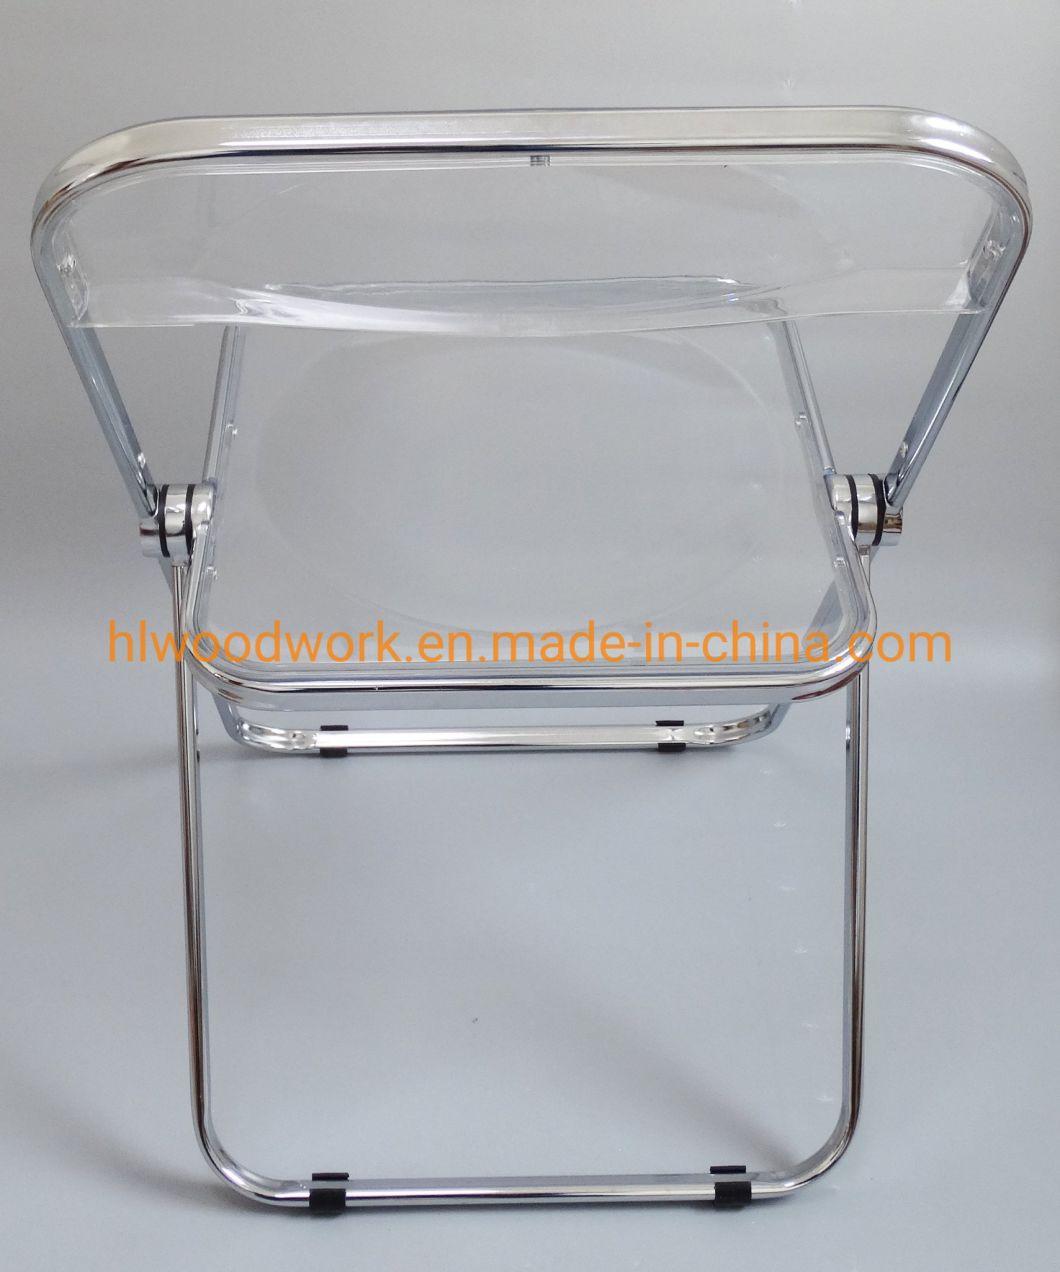 Modern Folded Office/Bar/Dining/Leisure/Banquet/Wedding/Meeting Folding Plastic Chair in Chrome Frame Transparent Clear PC Plastic Dining Chair